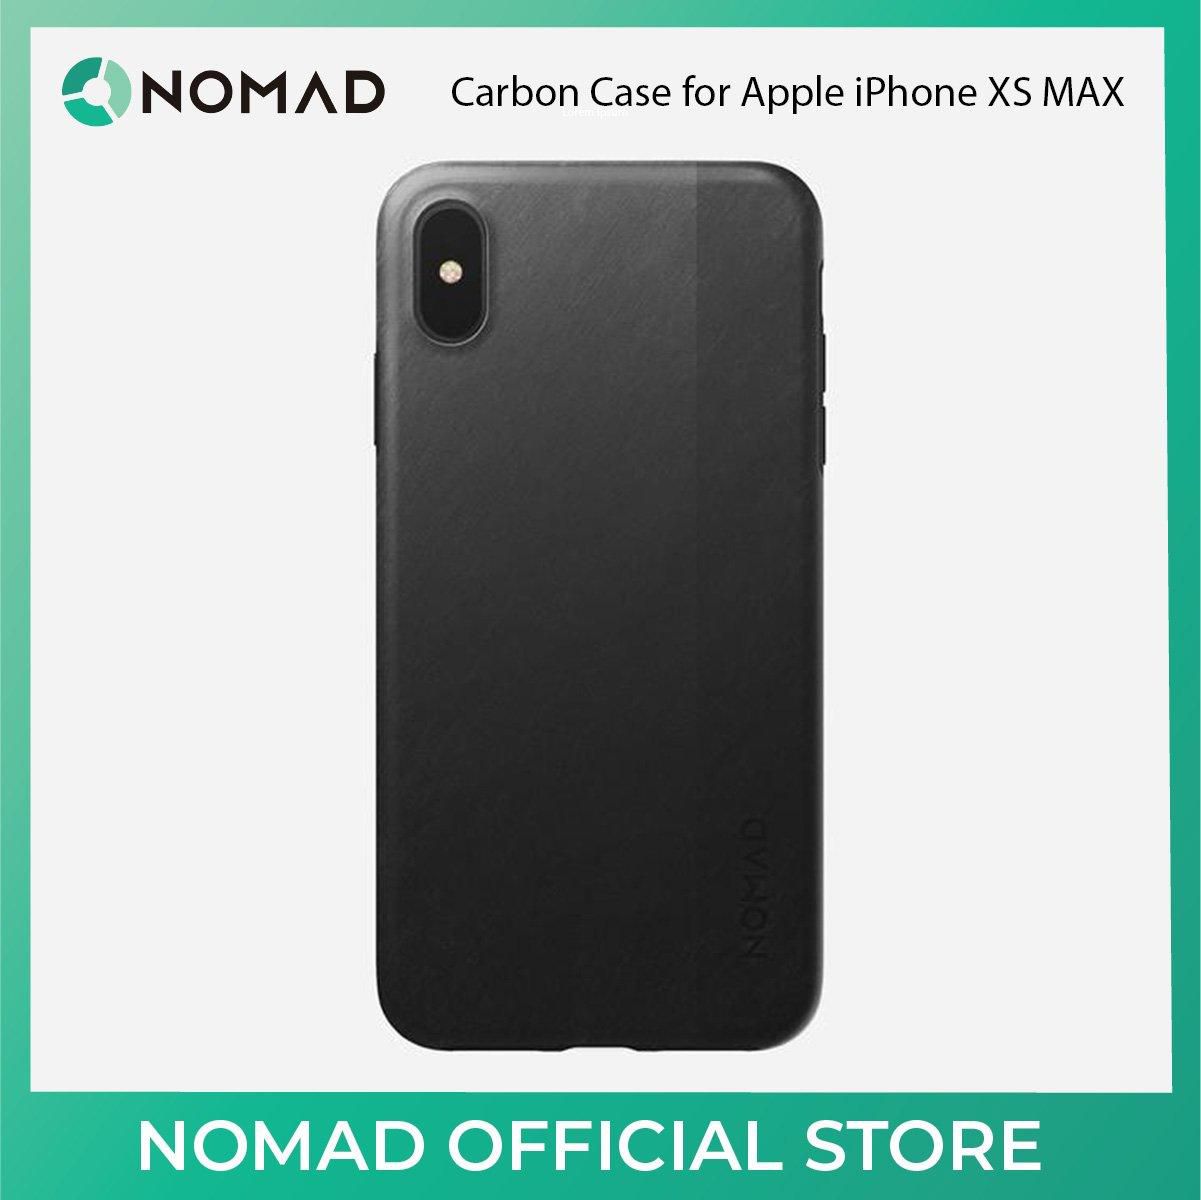 Nomad Carbon Case for Apple iPhone XS Max (Black)